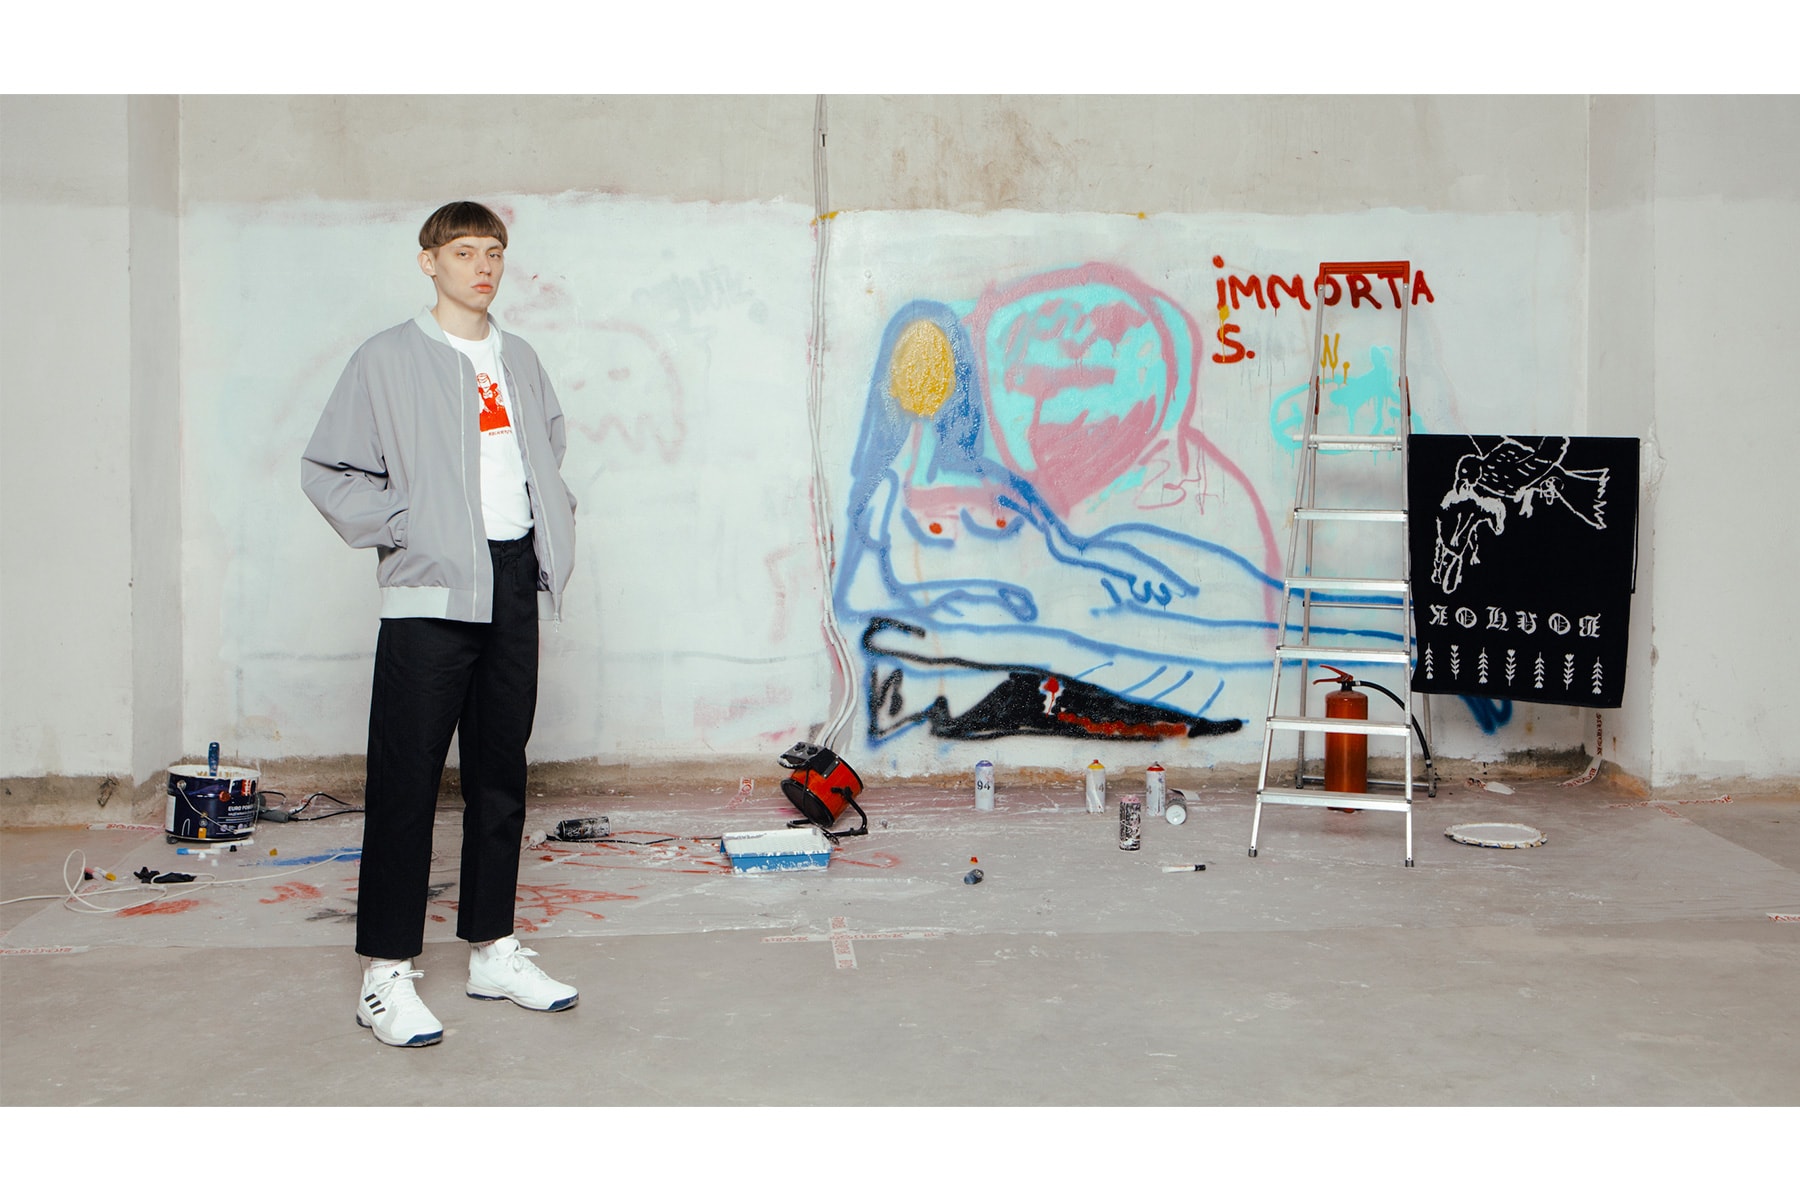 VOLCHOK clothing Russia "REPLICA" Collection Lookbook streetwear